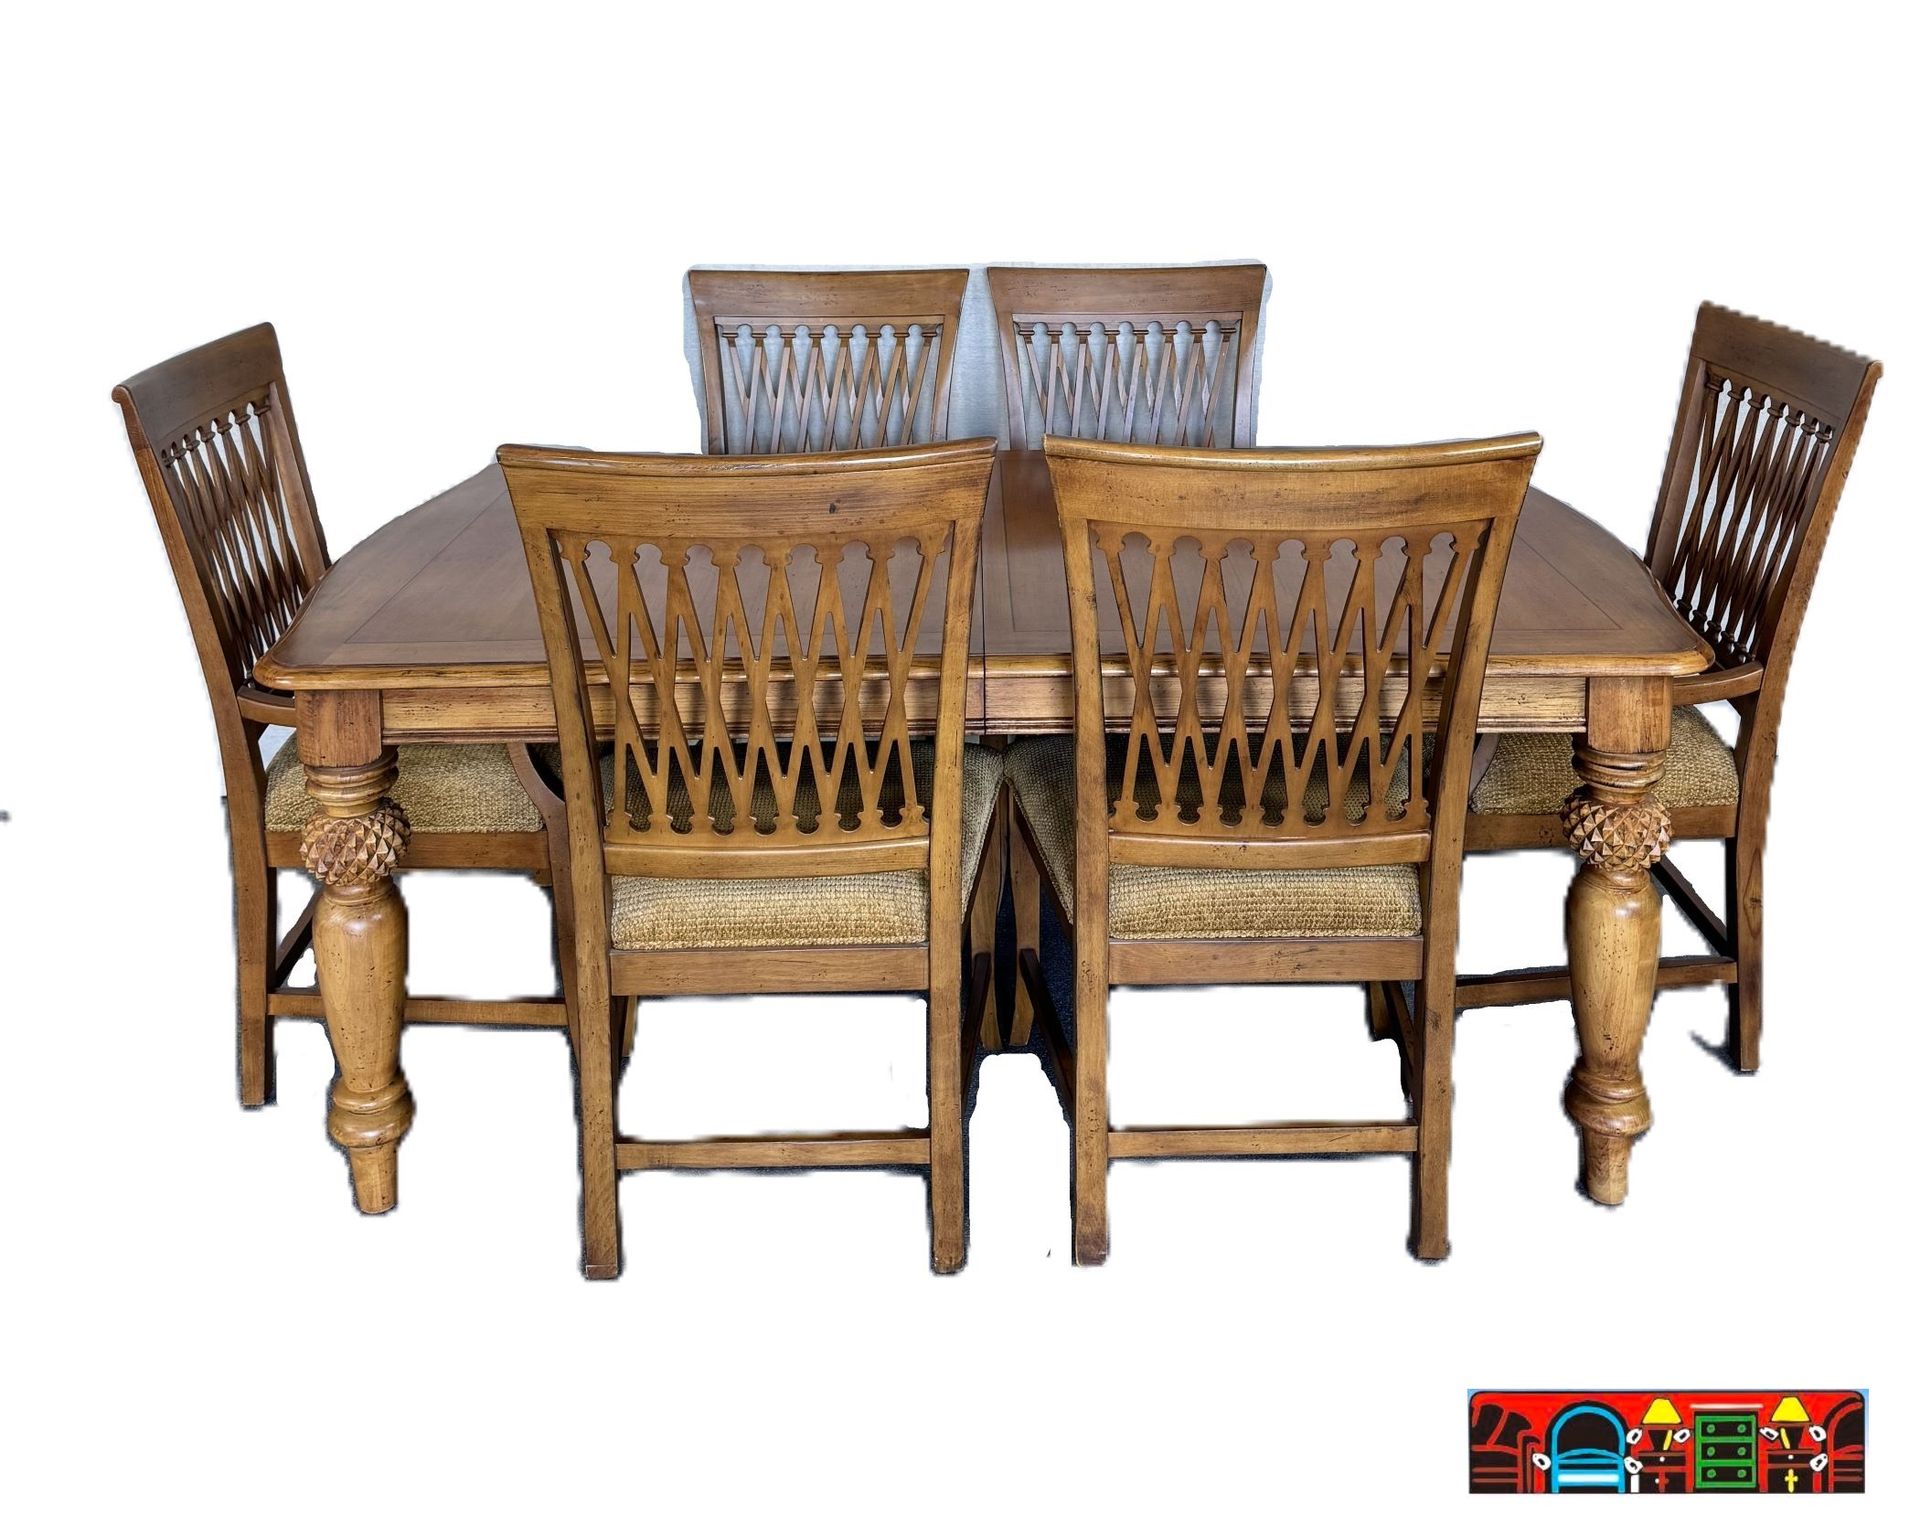 Tommy Bahama dining set for sale: used, solid wood in medium brown, rectangular table with pineapple leg details, and six chairs, available at Bratz-CFW.